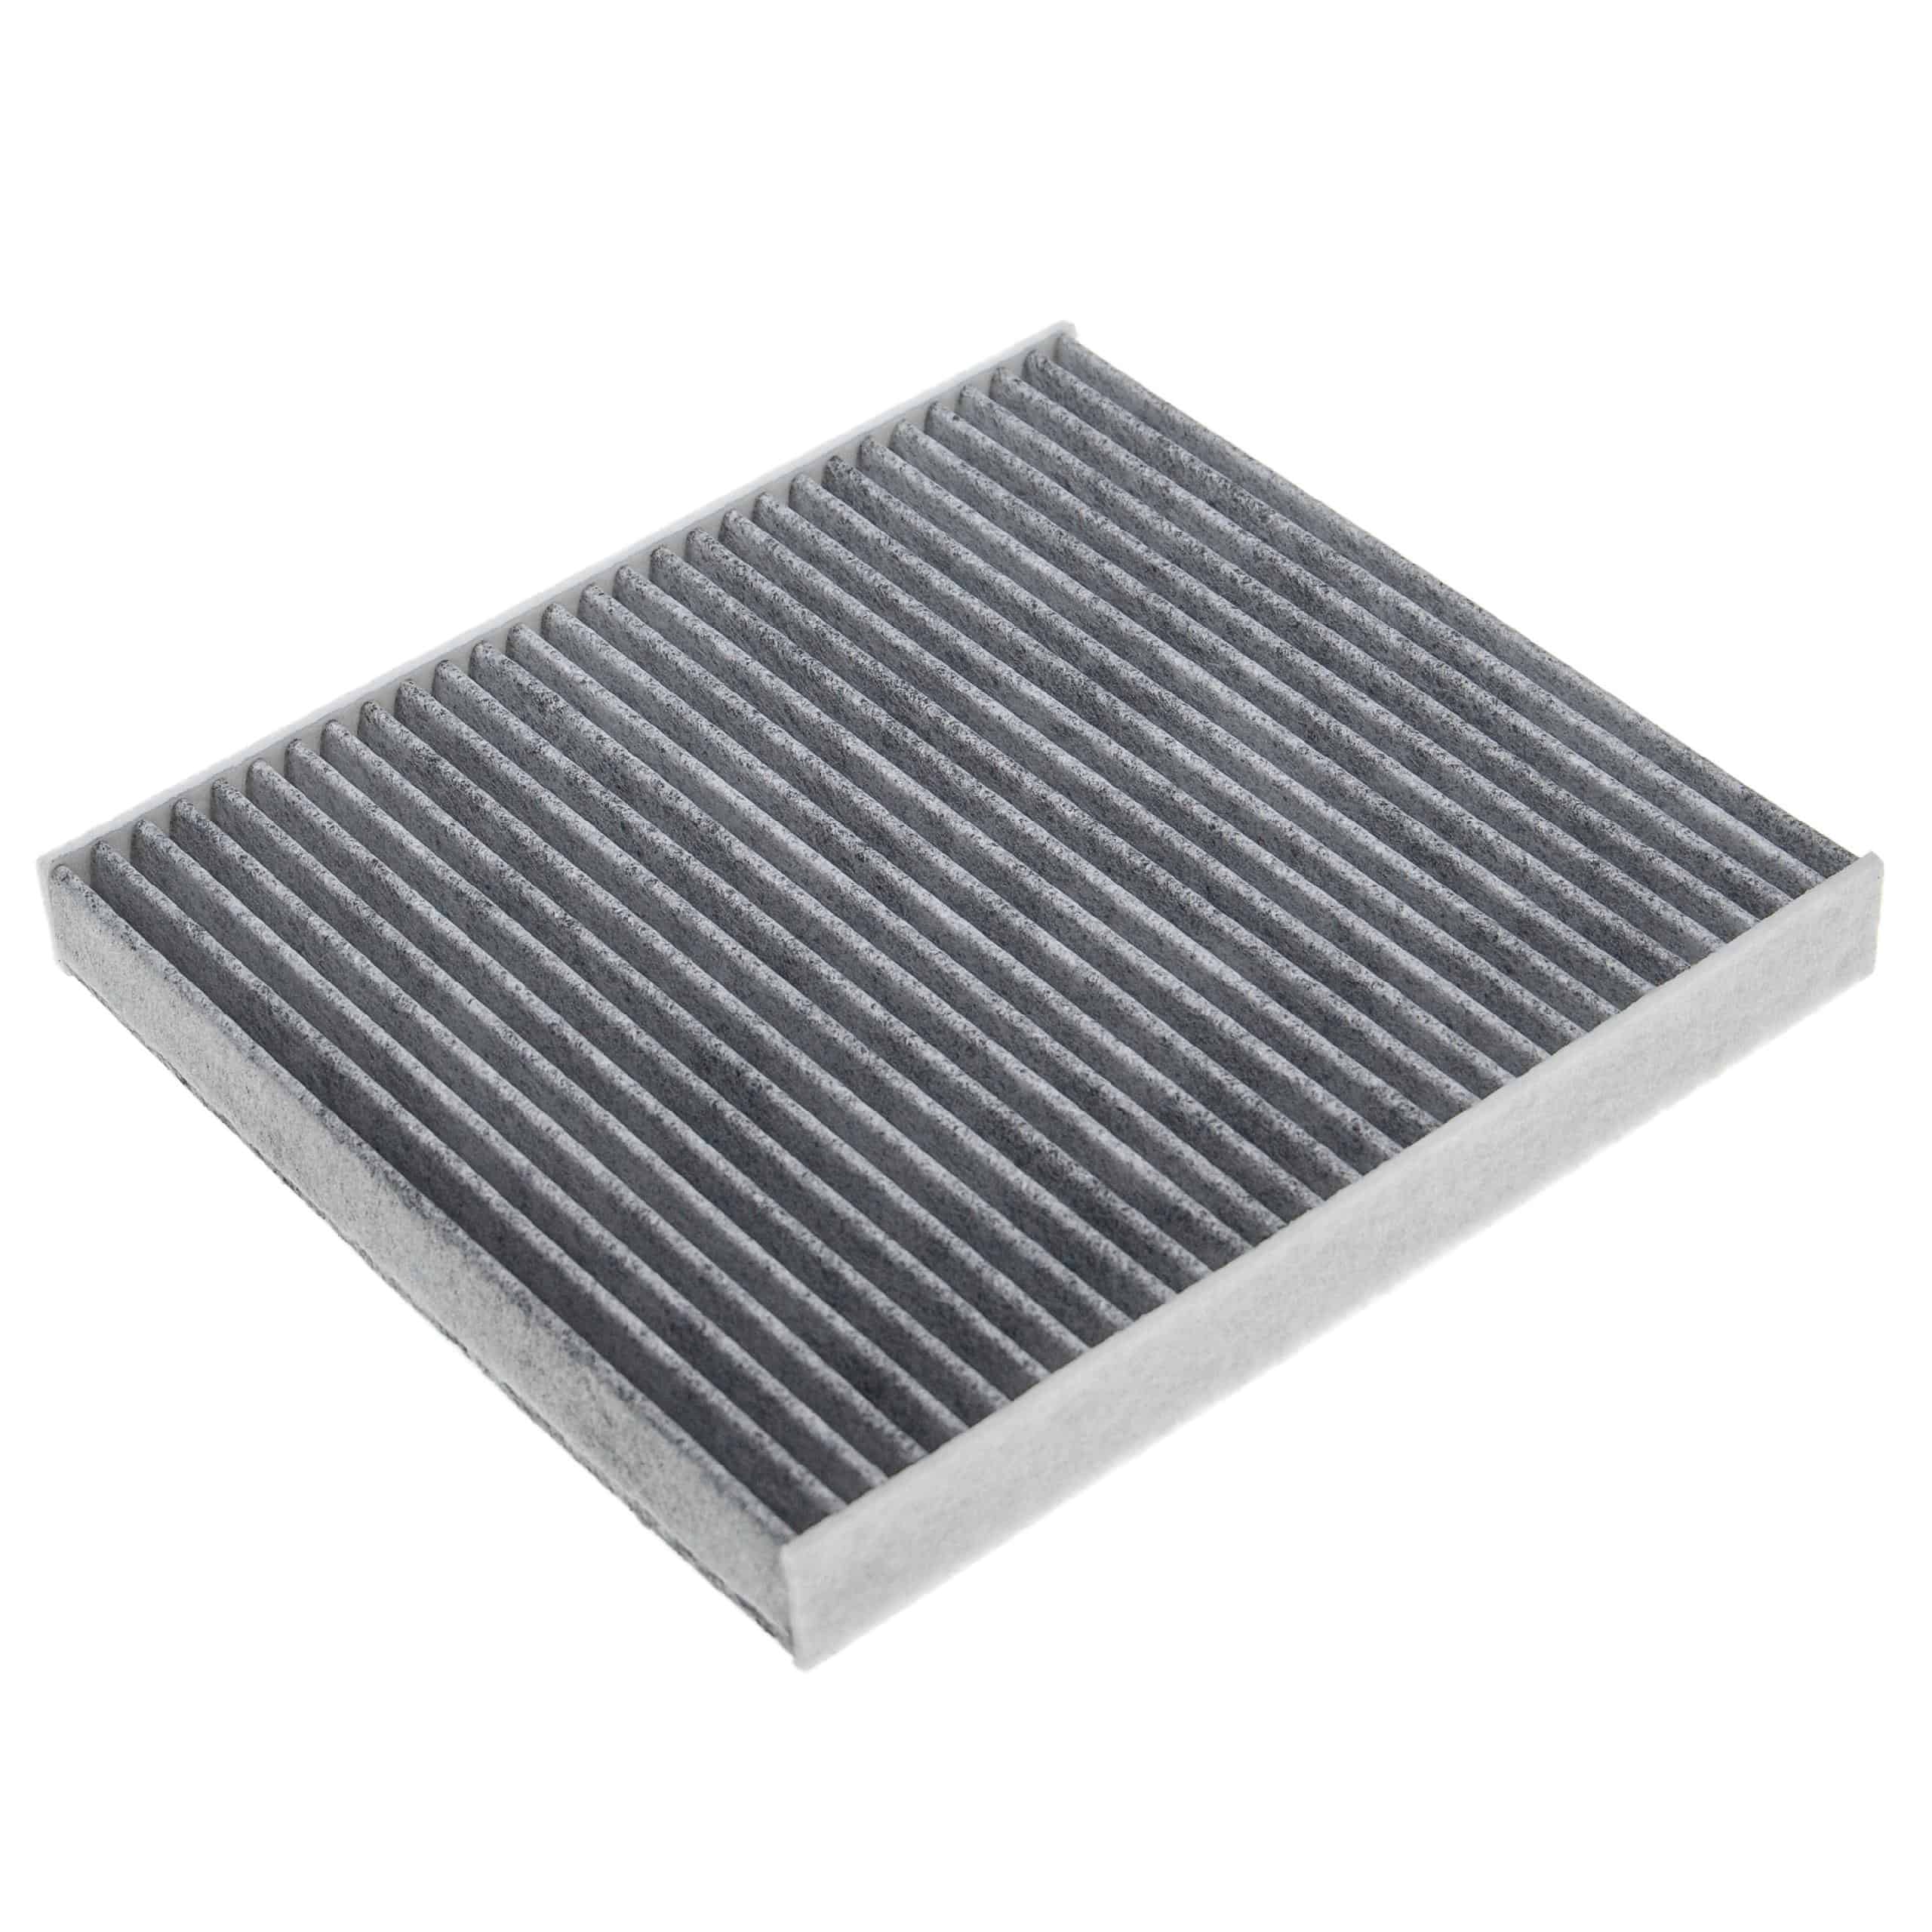 Cabin Air Filter replaces Alco Filter MS-6459C etc.